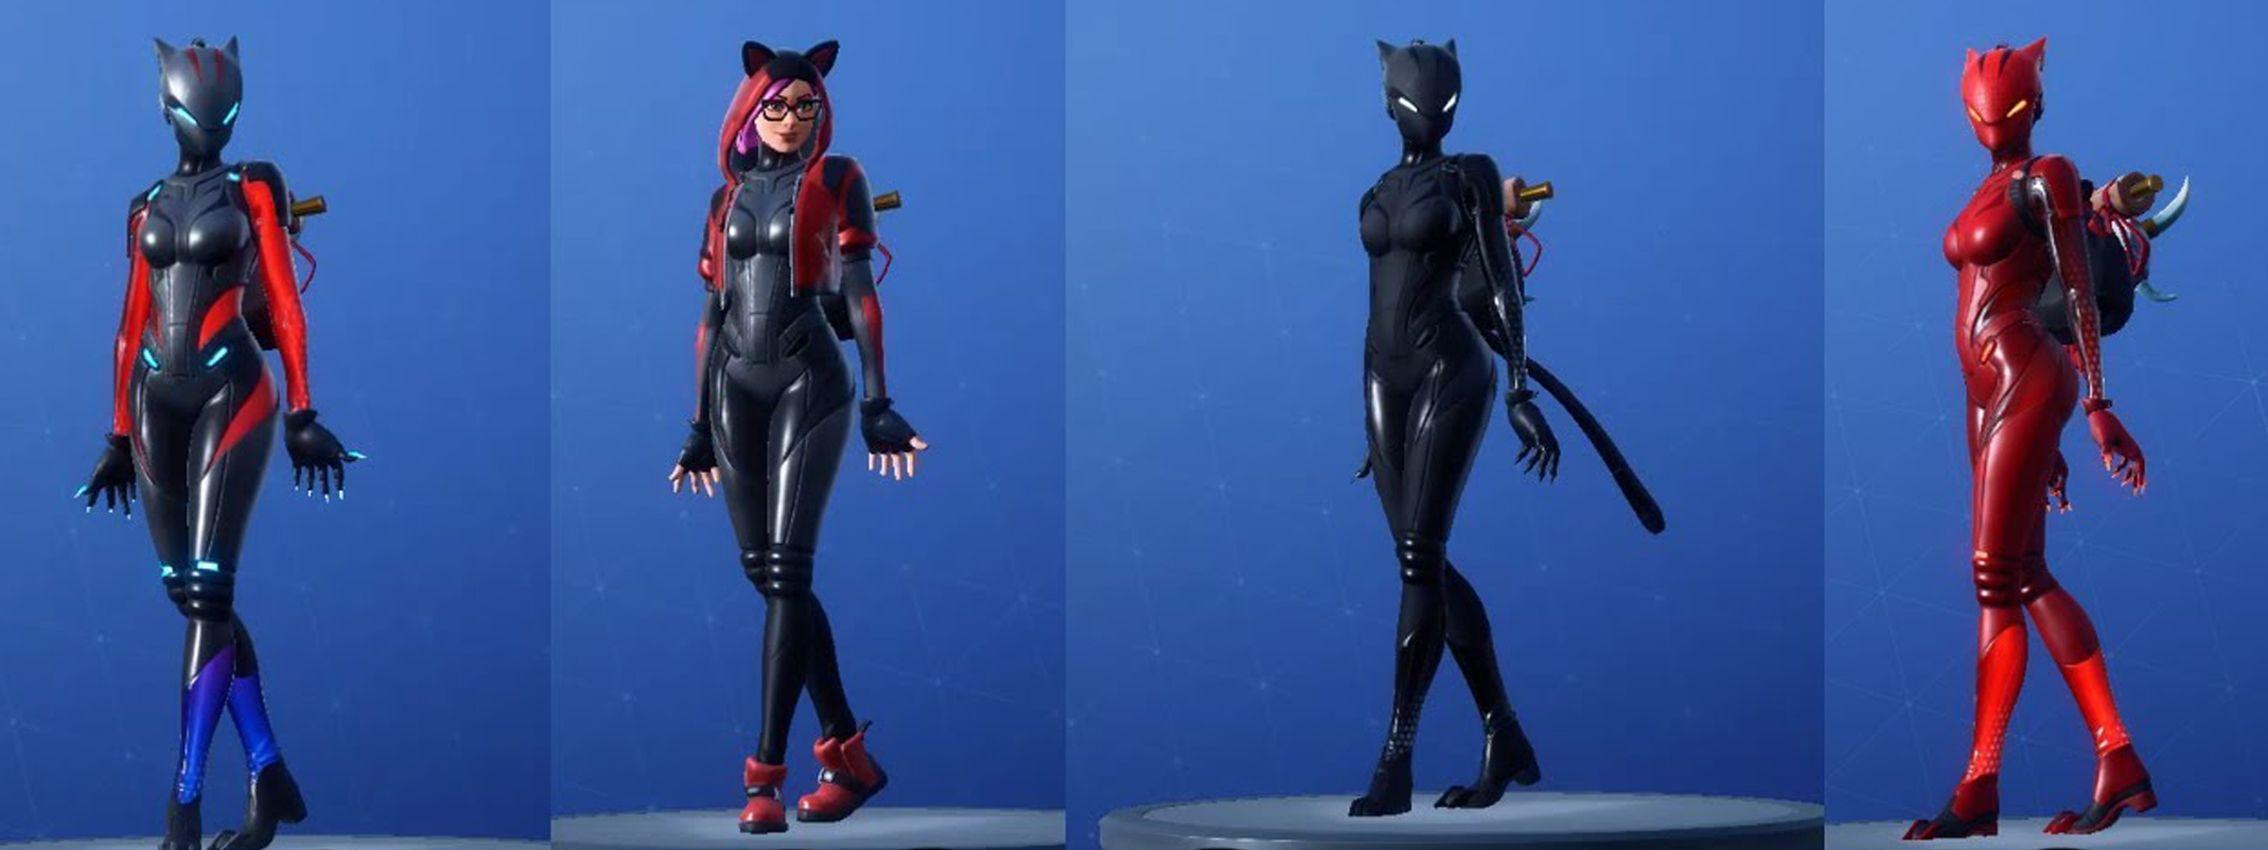 Download wallpapers Fortnite Red Lynx Skin Fortnite main characters red  stone background Red Lynx Fortnite skins Red Lynx Skin Red Lynx Fortnite  Fortnite characters for desktop with resolution 2880x1800 High Quality HD